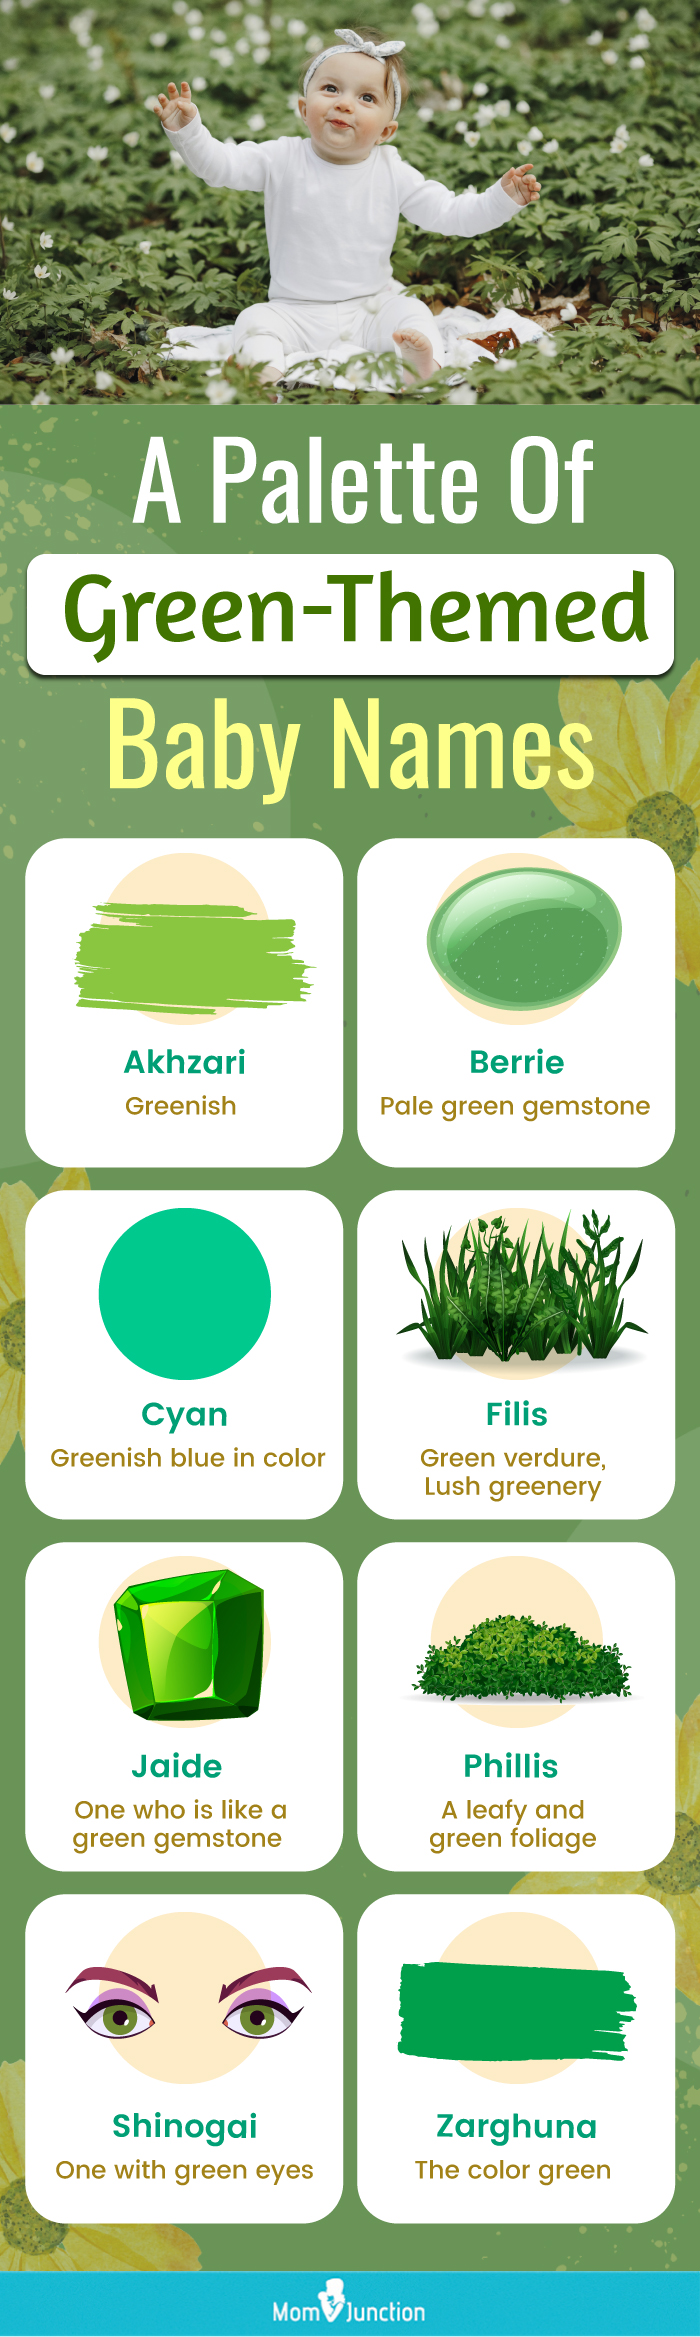 a palette of green themed baby names (infographic)